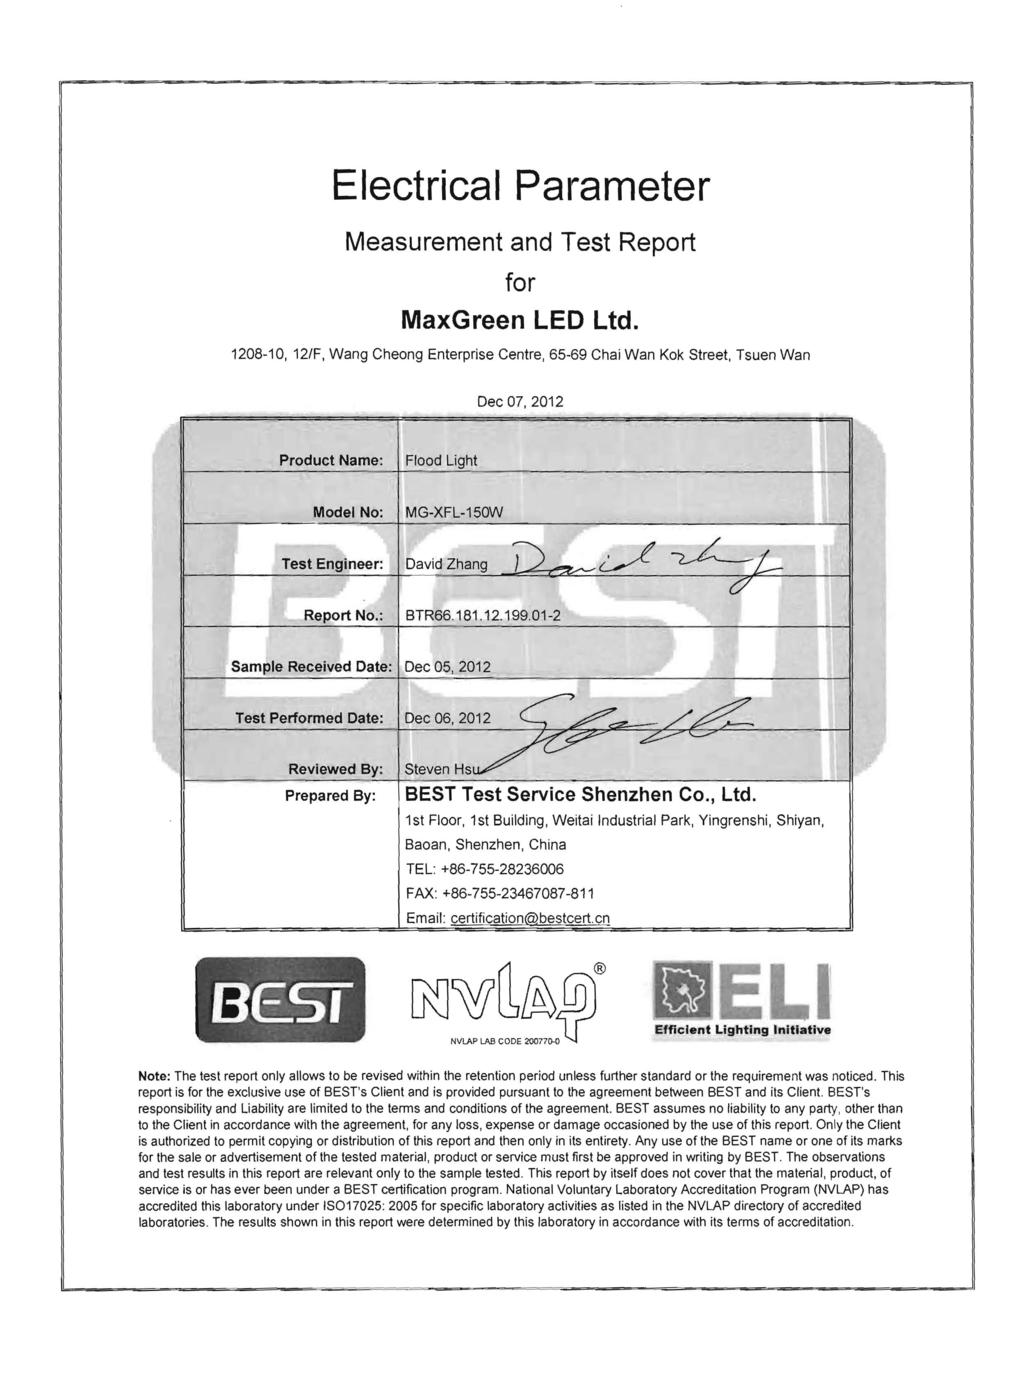 ~ Electrical Parameter Measurement and Test Report for MaxGreen LED Ltd.